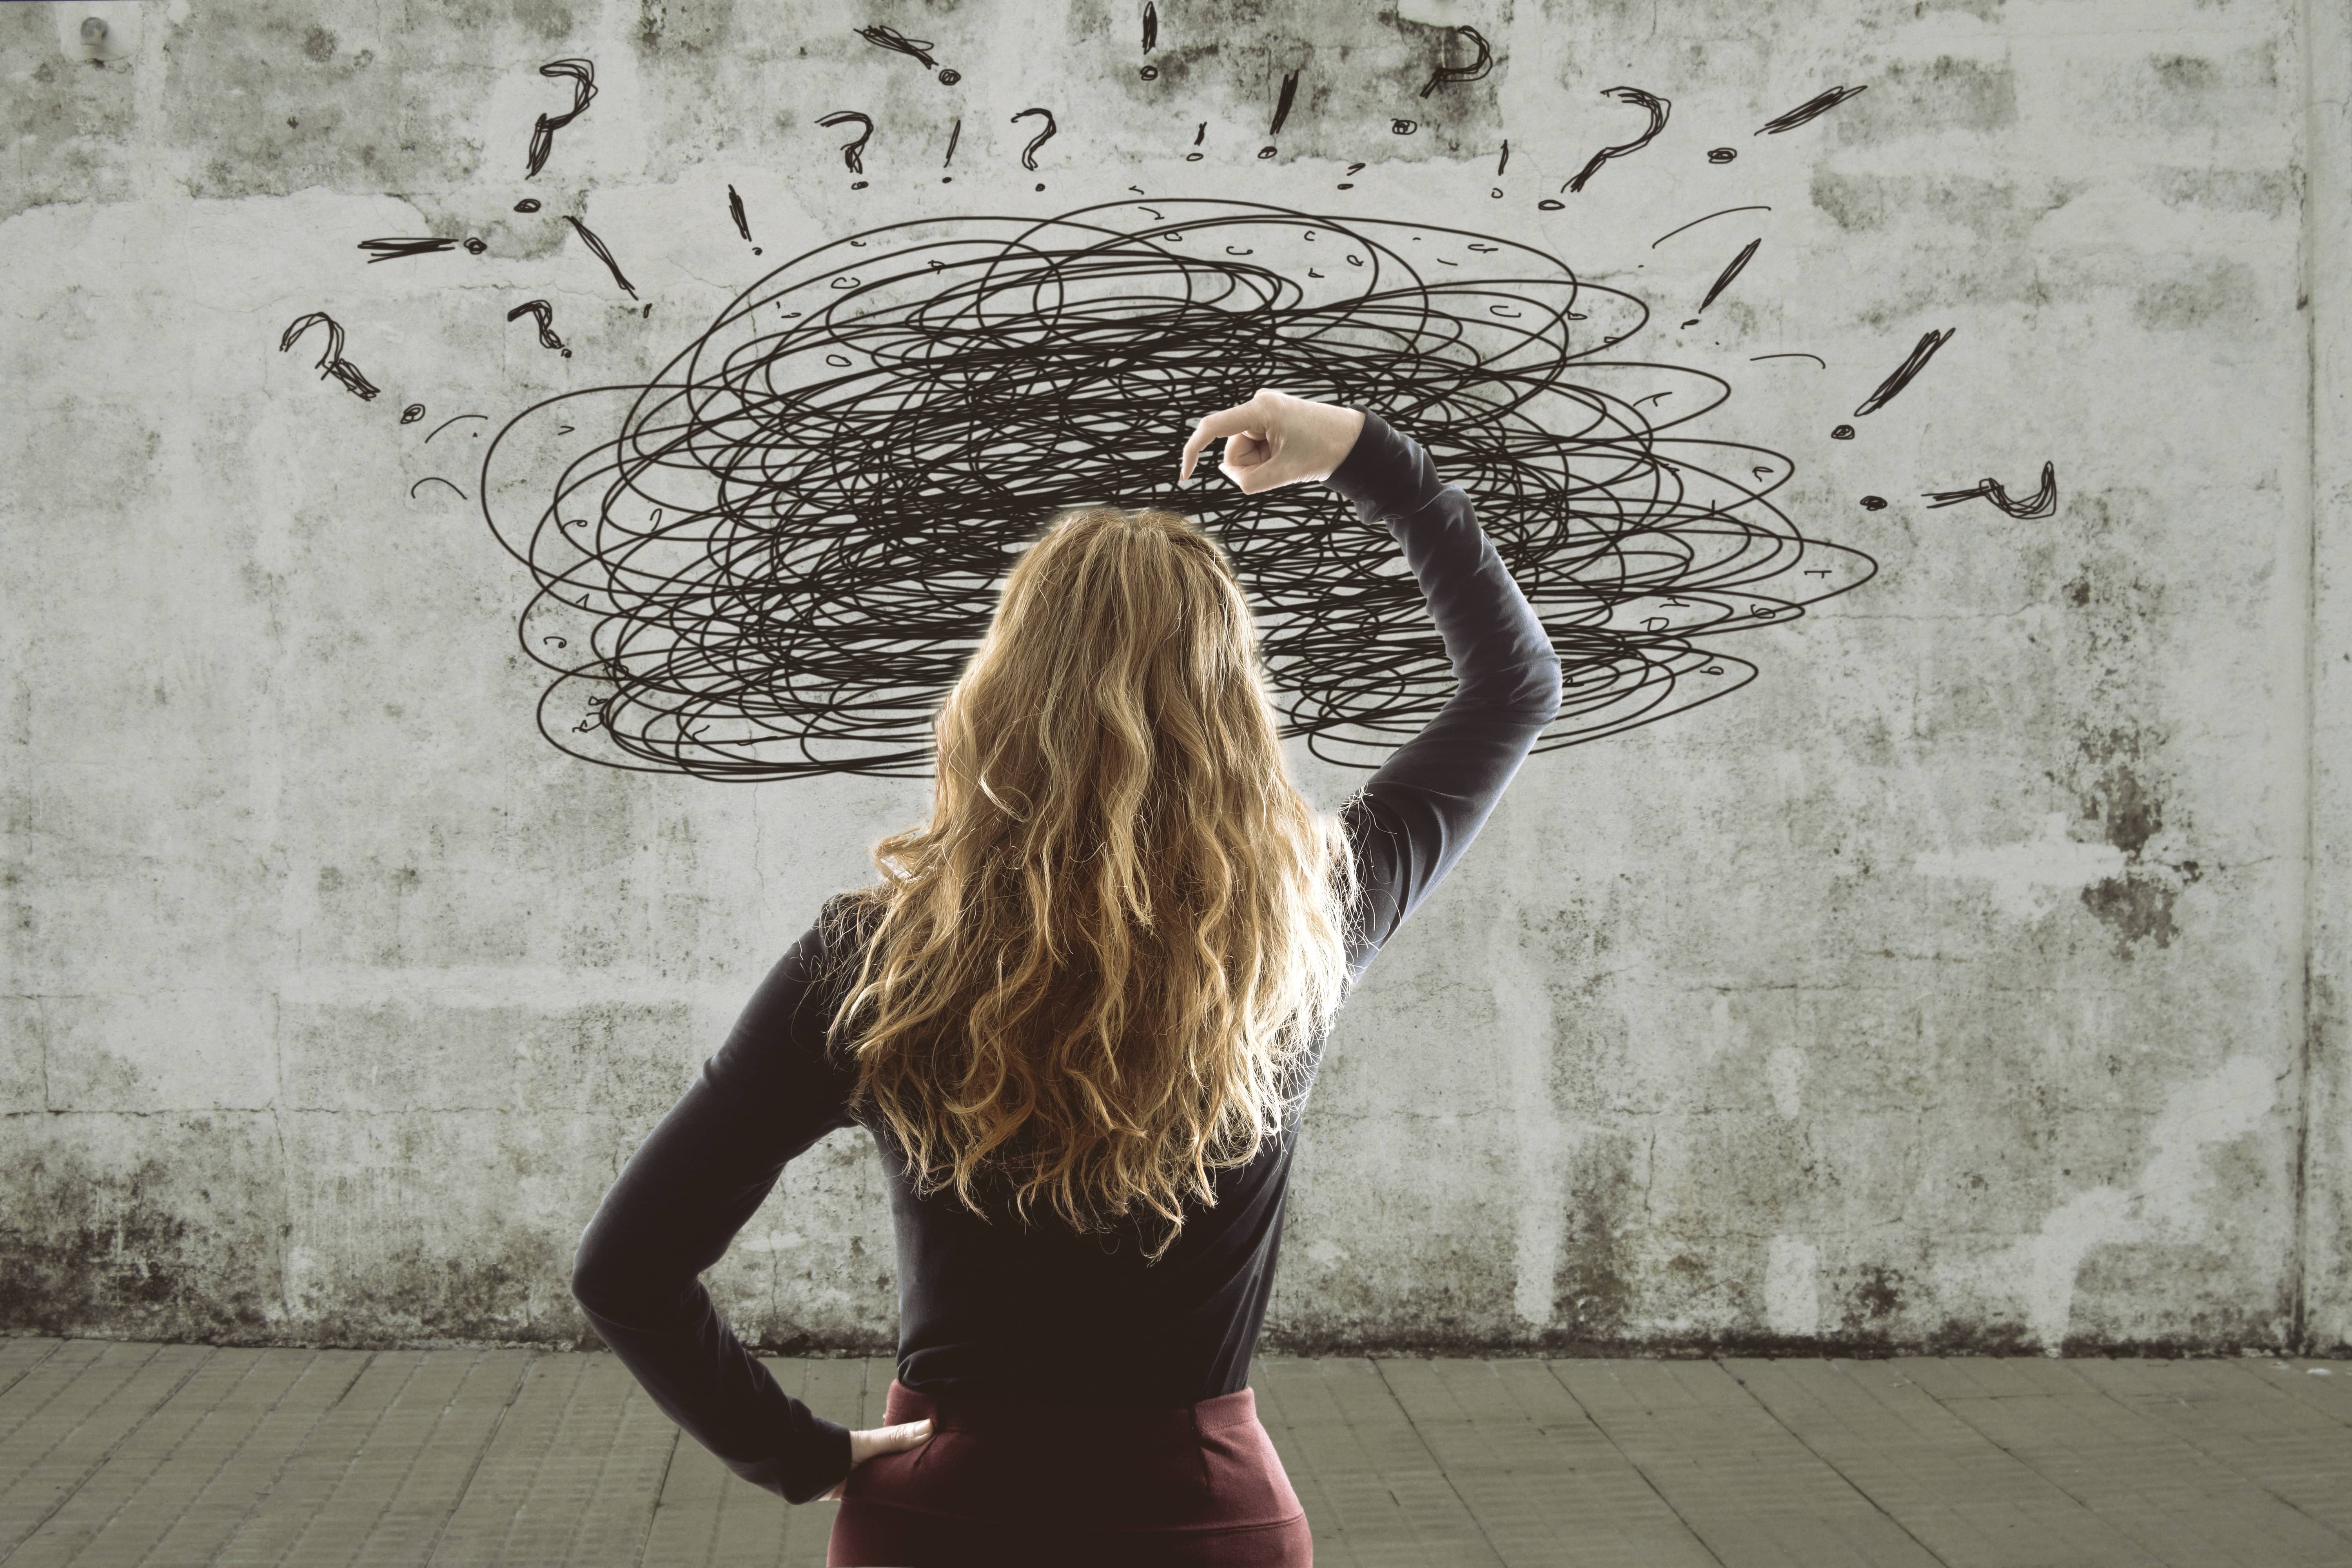 Blonde woman with swirling above her head representing the chaos and stress of the Inner Critic.